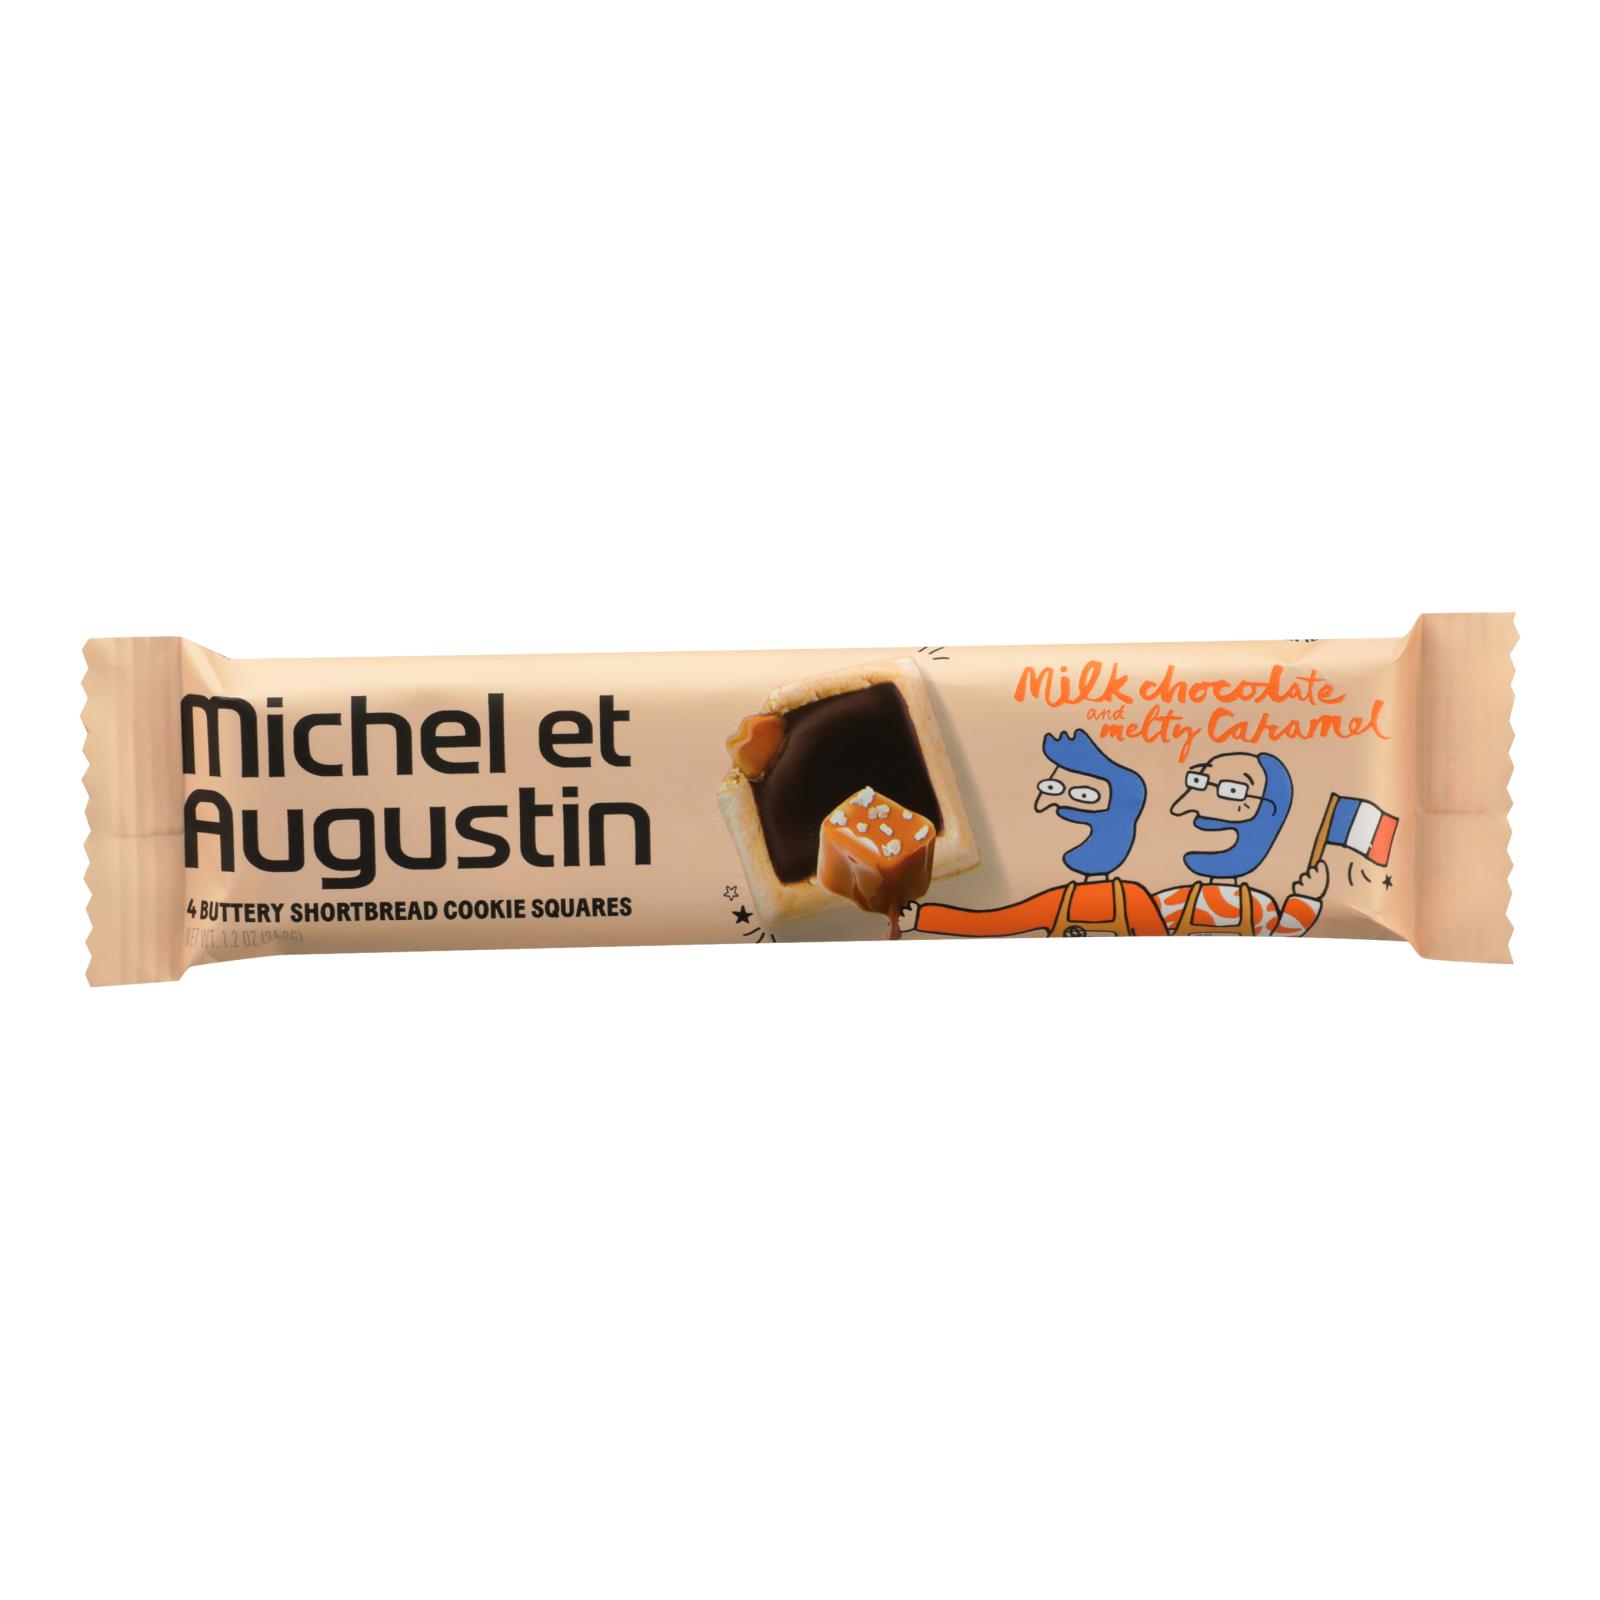 Michel Et Augustin Milk Chocolate And Melty Caramel Cookies - 18개 묶음상품 - 1.07 OZ